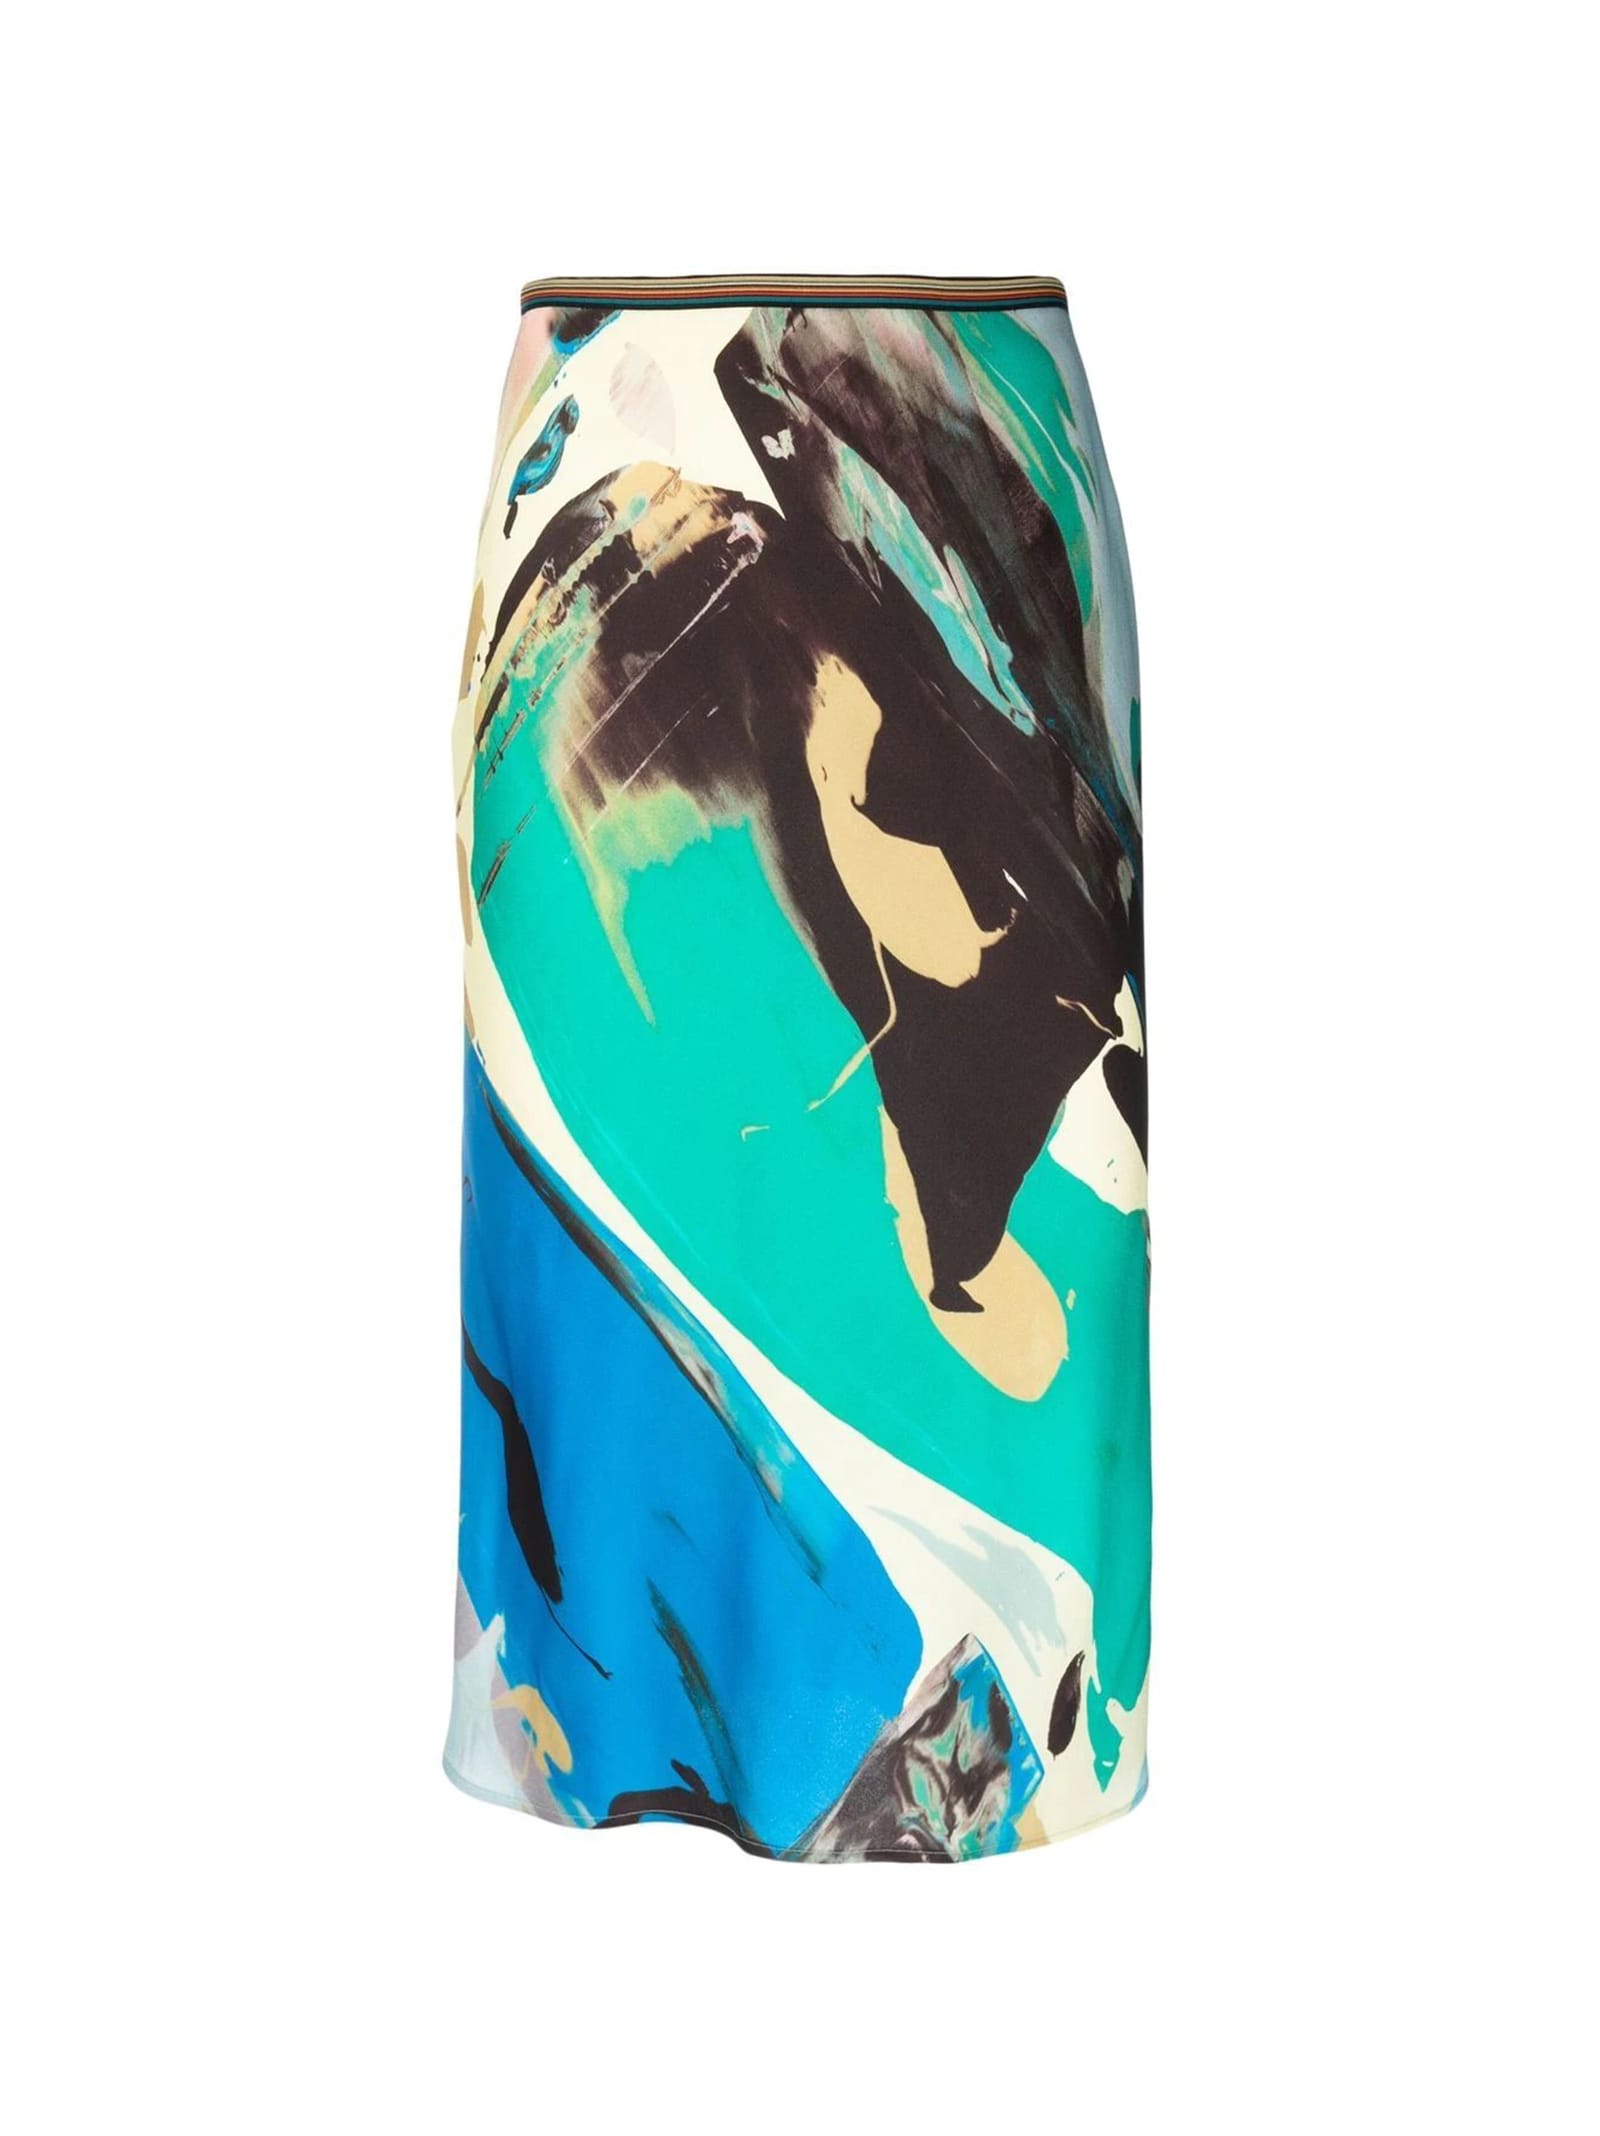 PAUL SMITH FANTASY SKIRT ABSTRACT LANDSCAPE